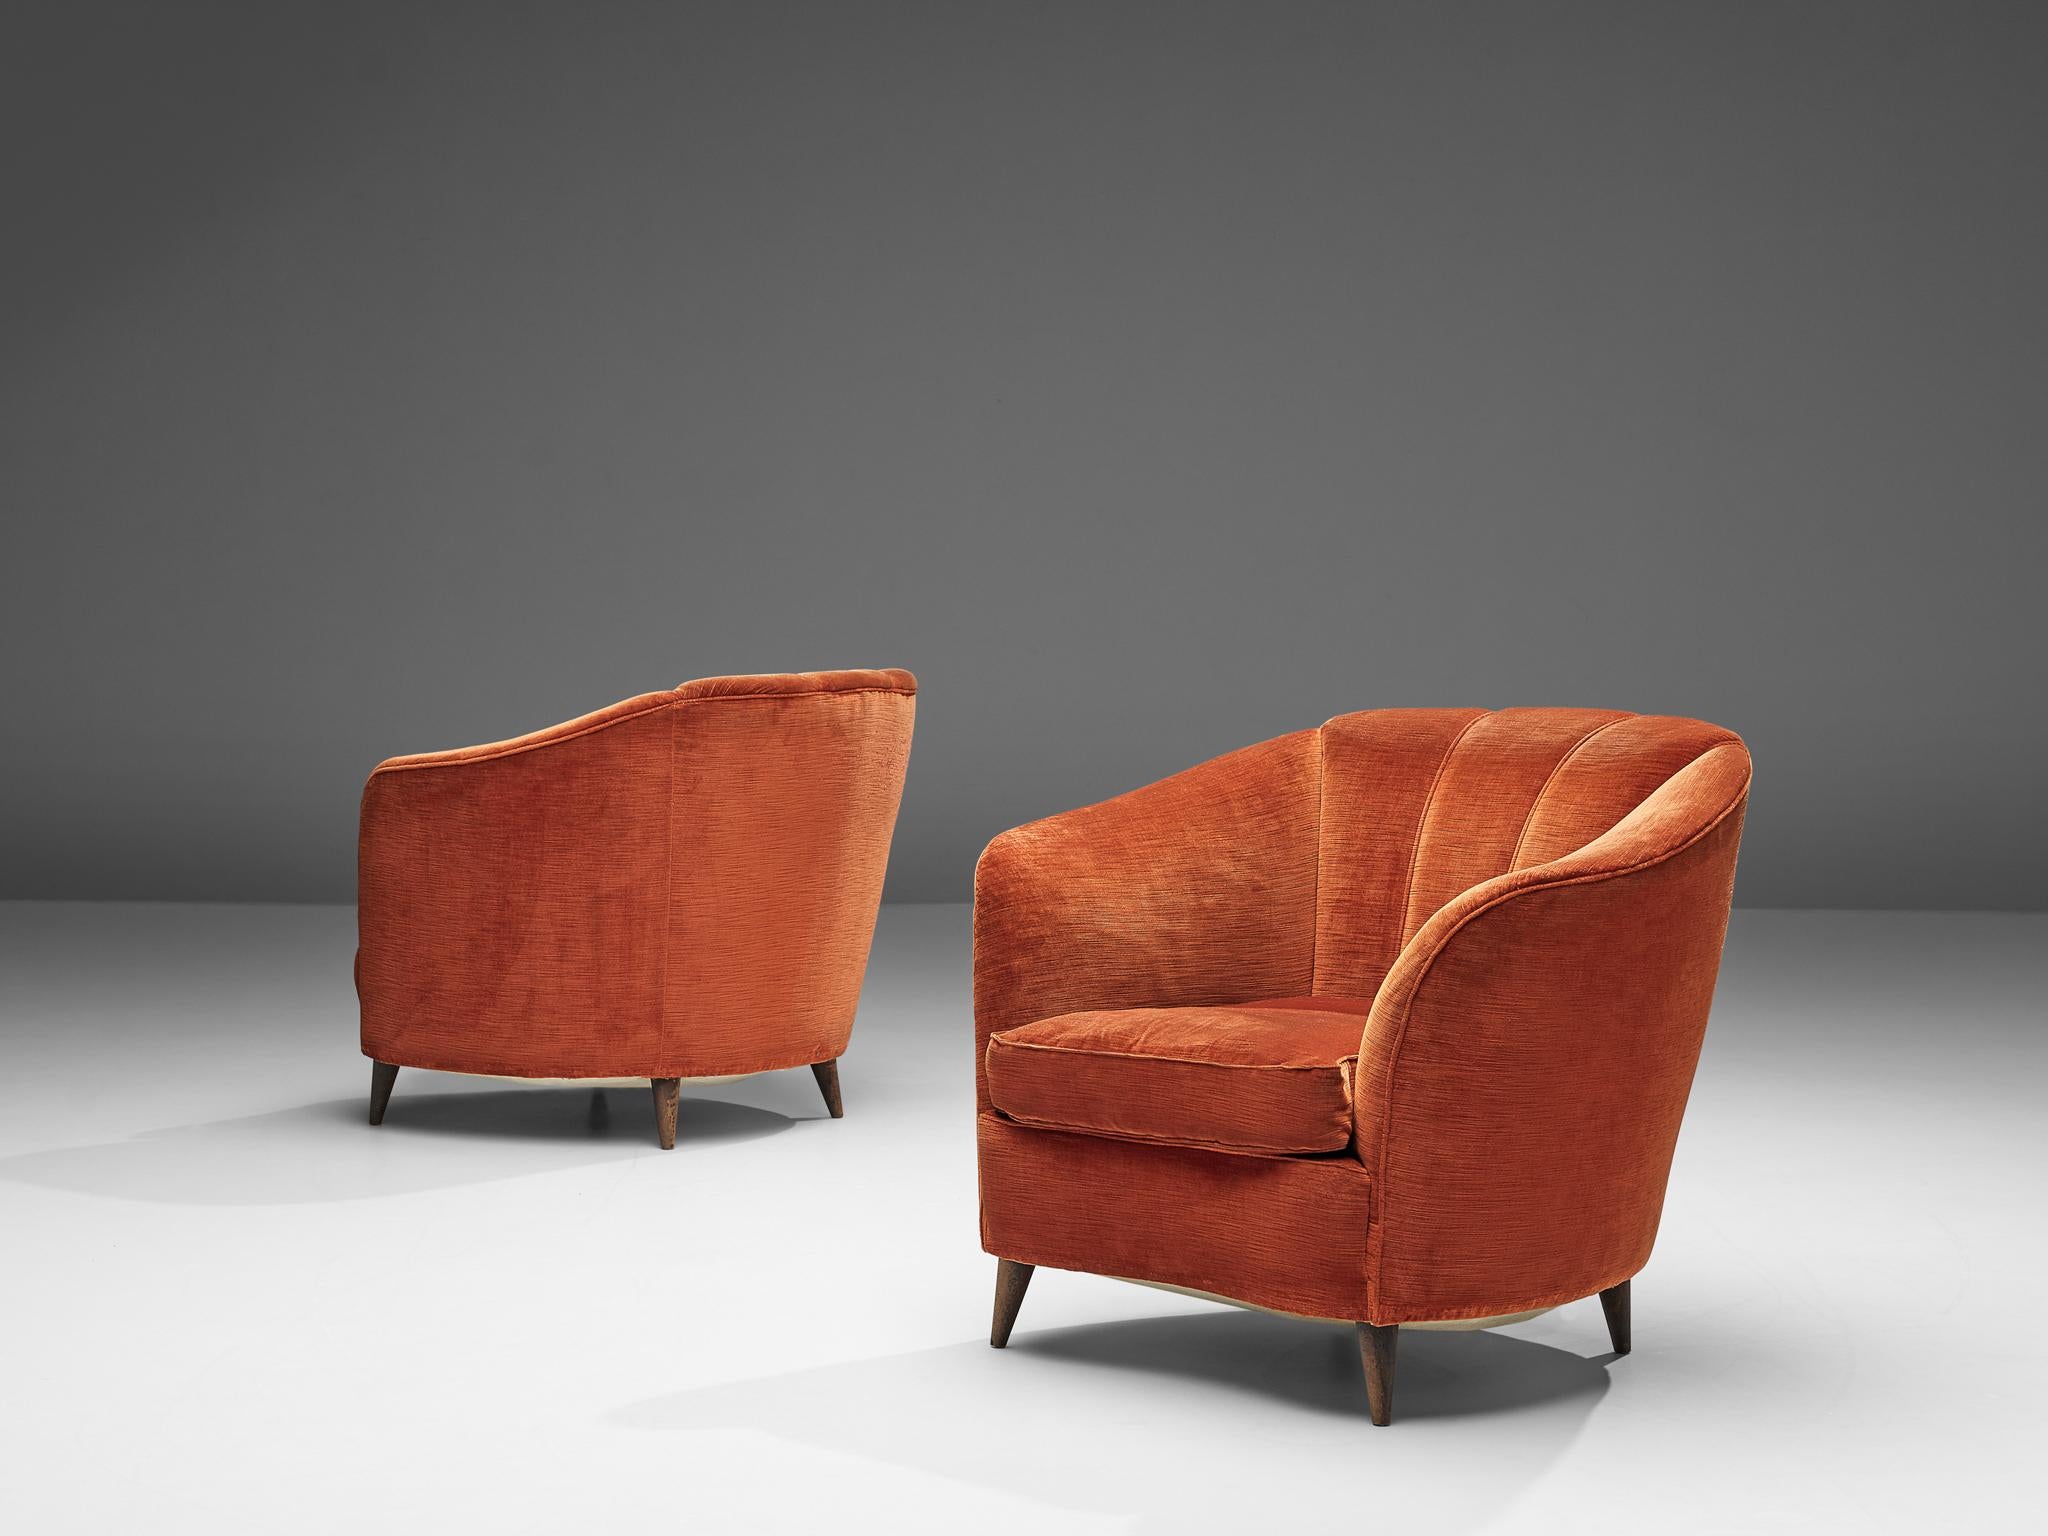 Pair of Italian lounge chairs, wood, velvet upholstery, Italy, 1950s

This pair of Italian lounge chairs featured a backrest on the same height as the armrests. Therefore a round shape is existing which has a decorative vertical tufting on the back.